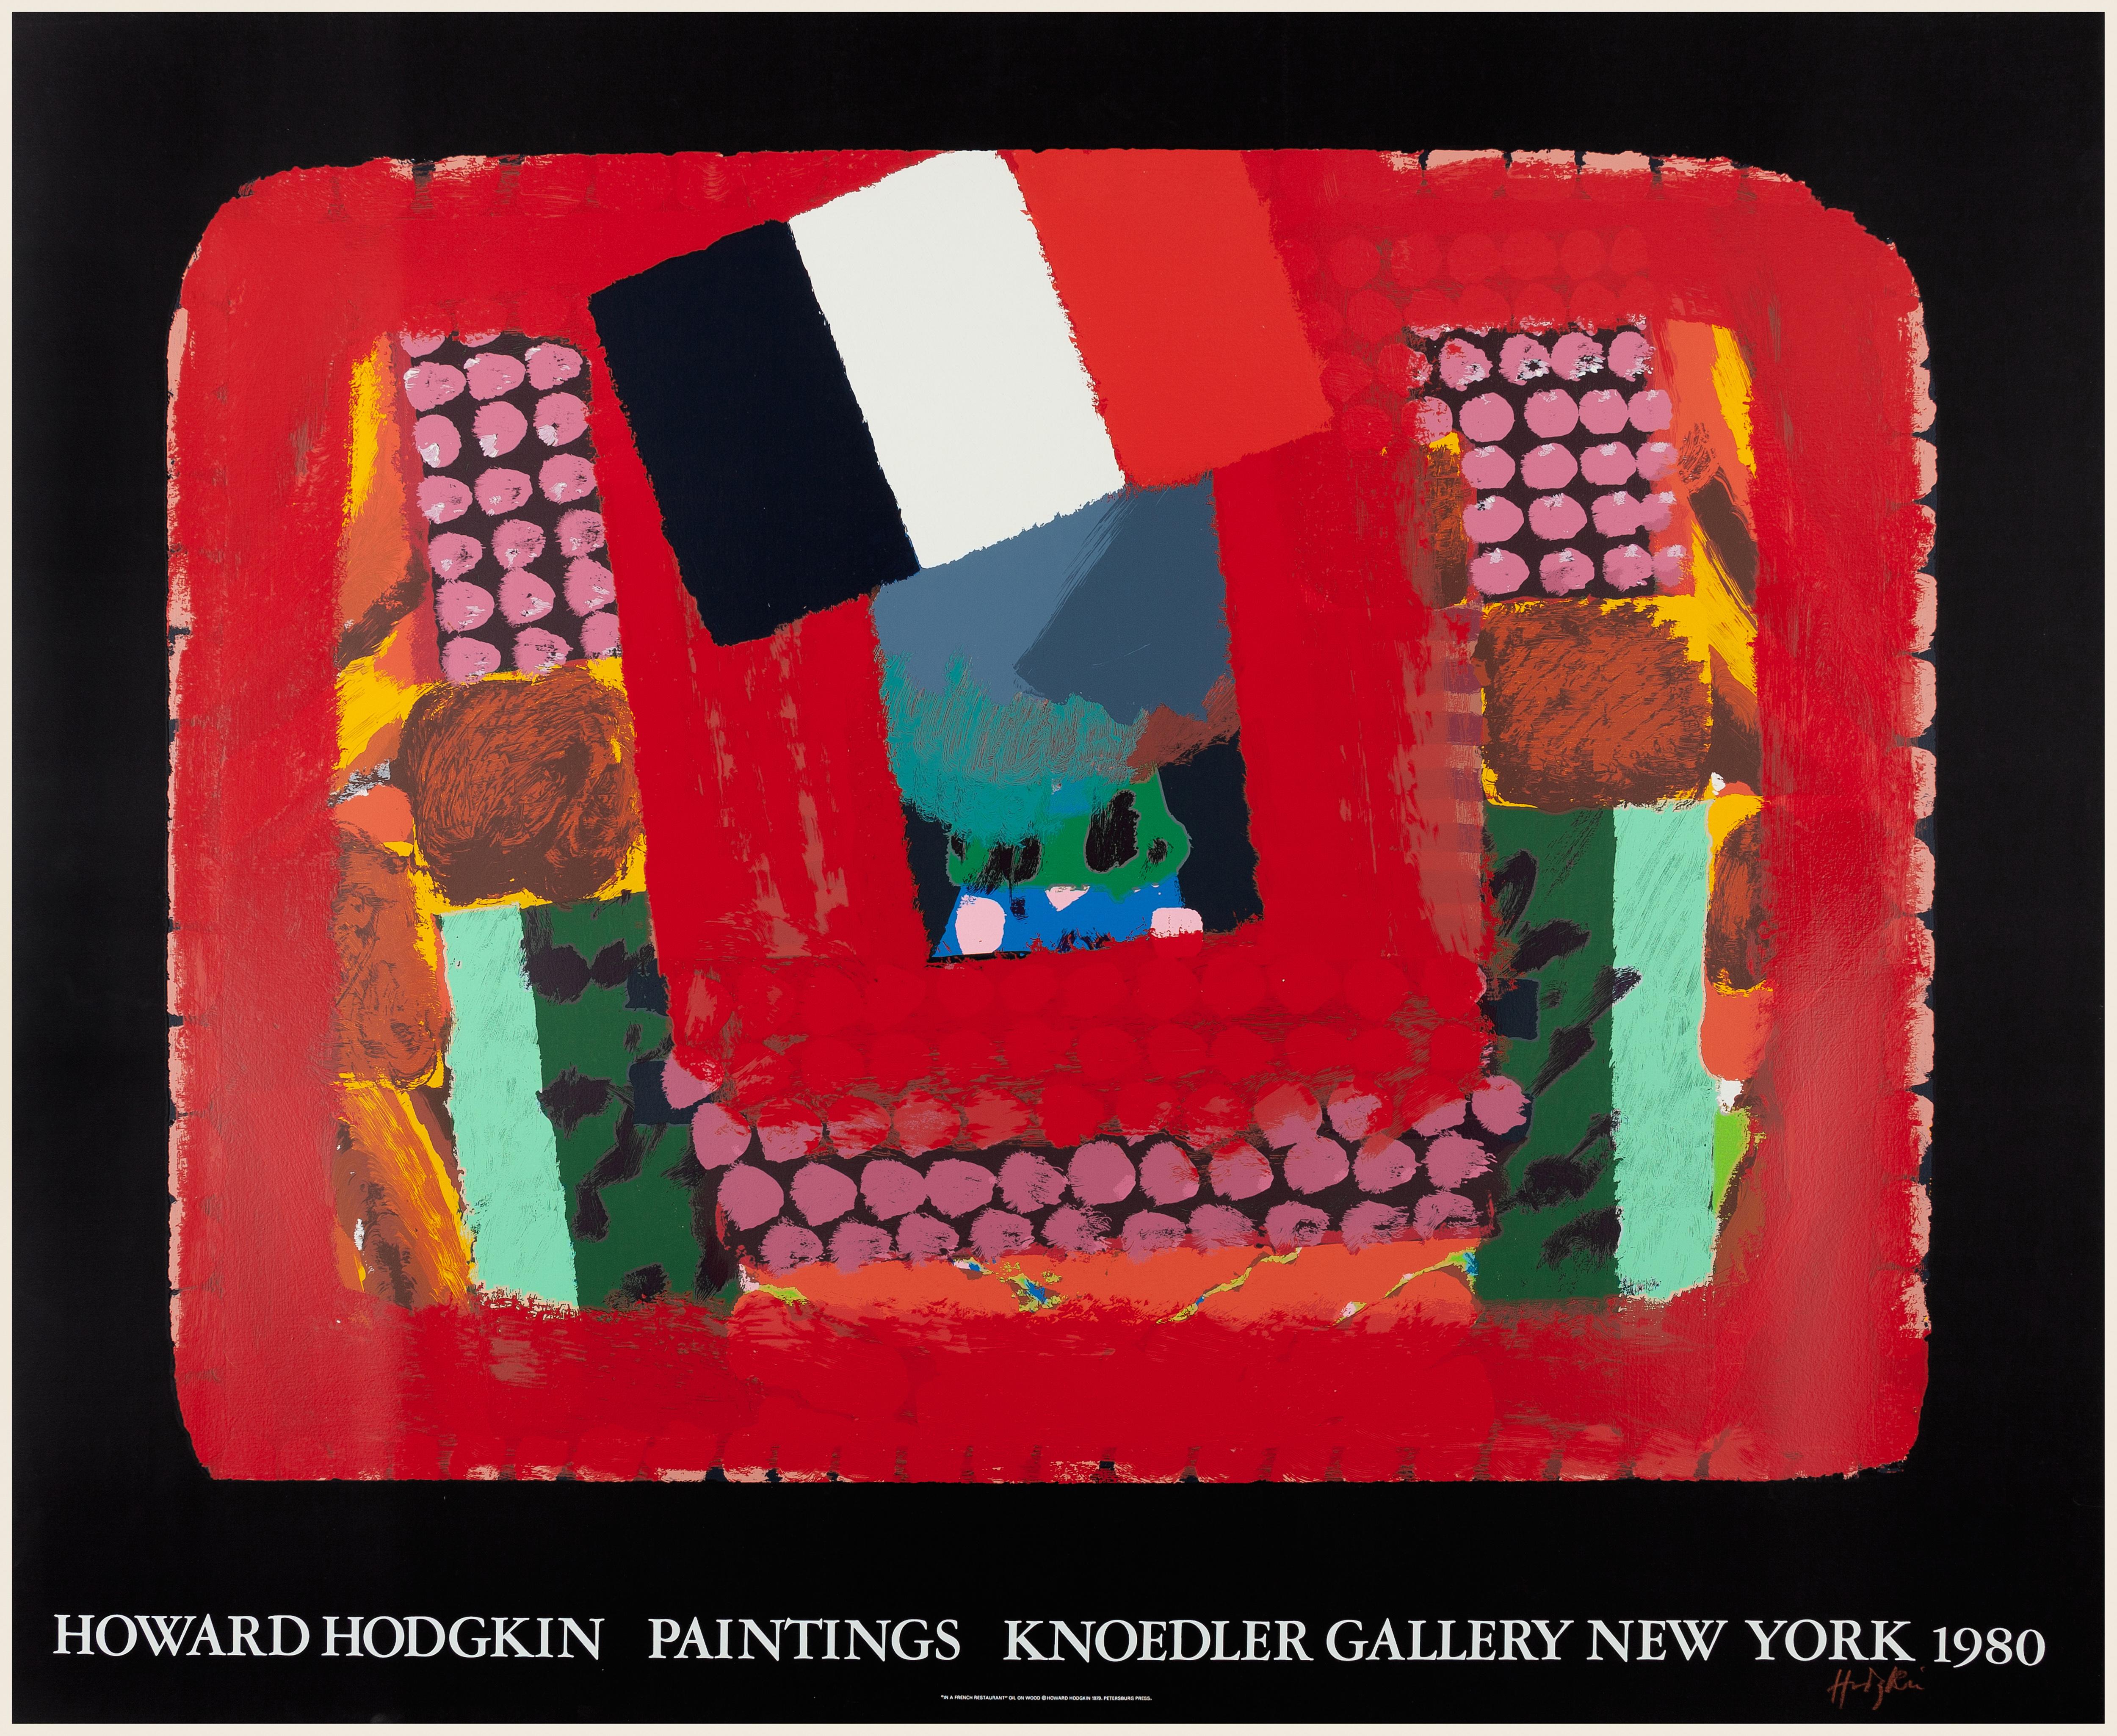 (After) Howard Hodgkin Abstract Print - In a French Restaurant (Knoedler Gallery) SIGNED poster colorful expressionist 